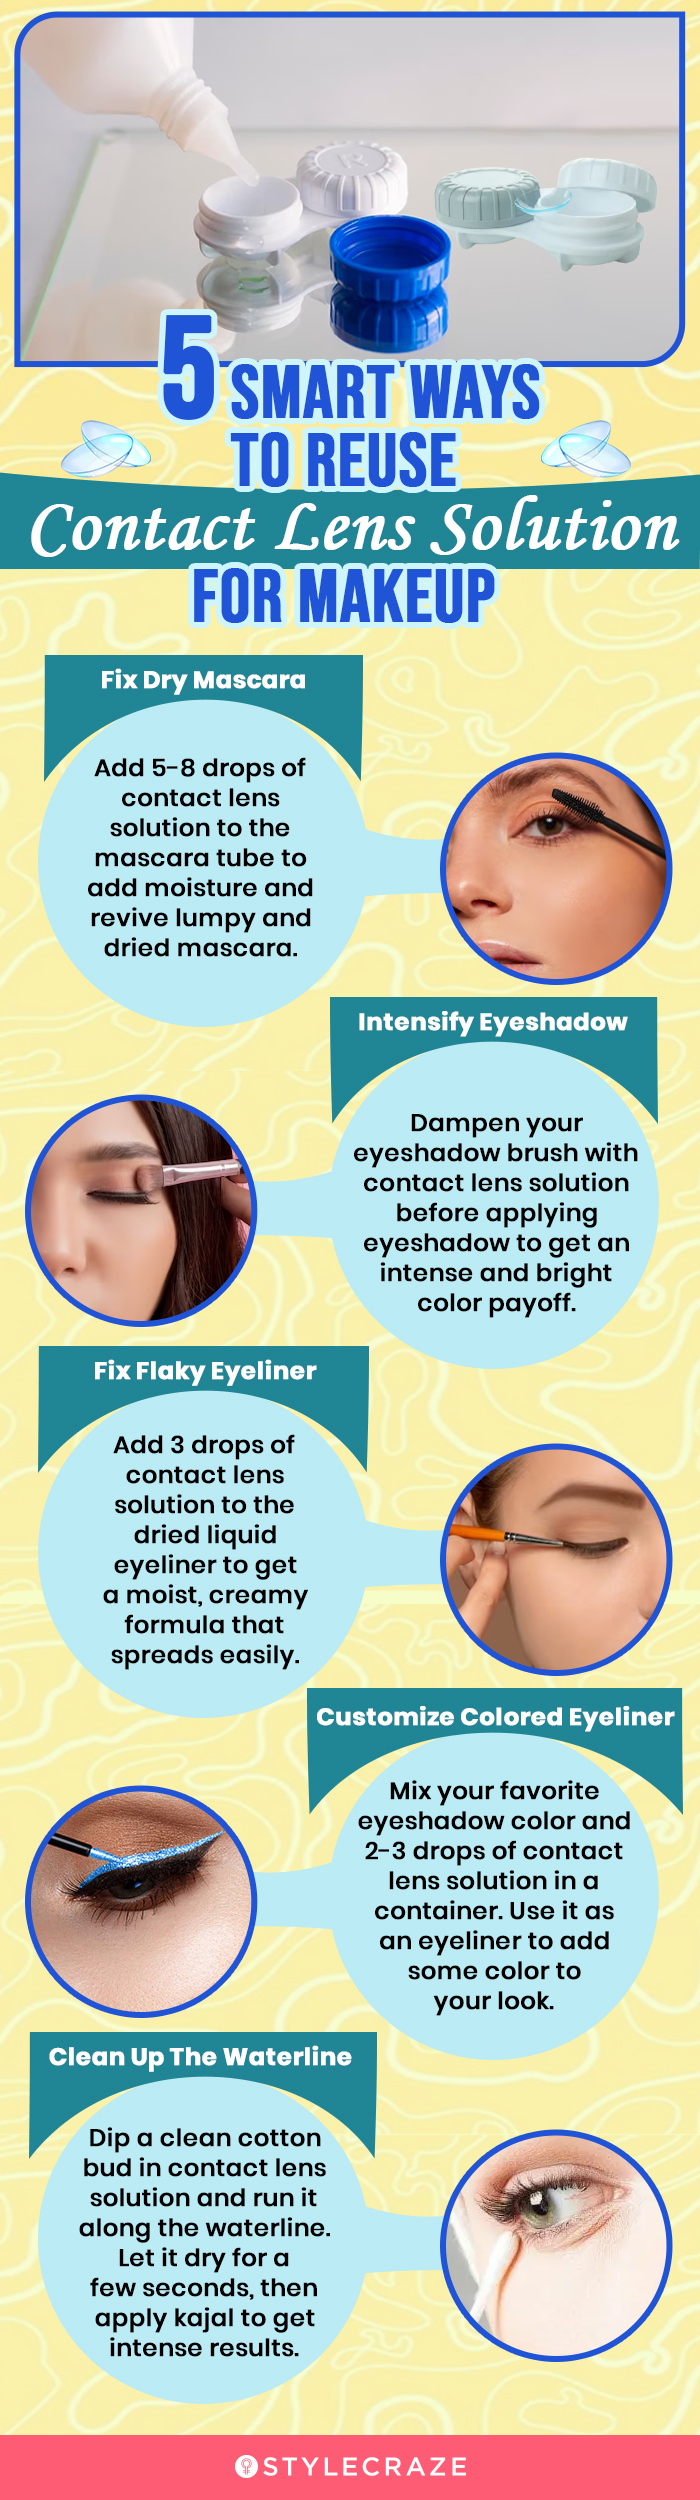 5 smart ways to reuse contact lens solution for makeup (infographic)